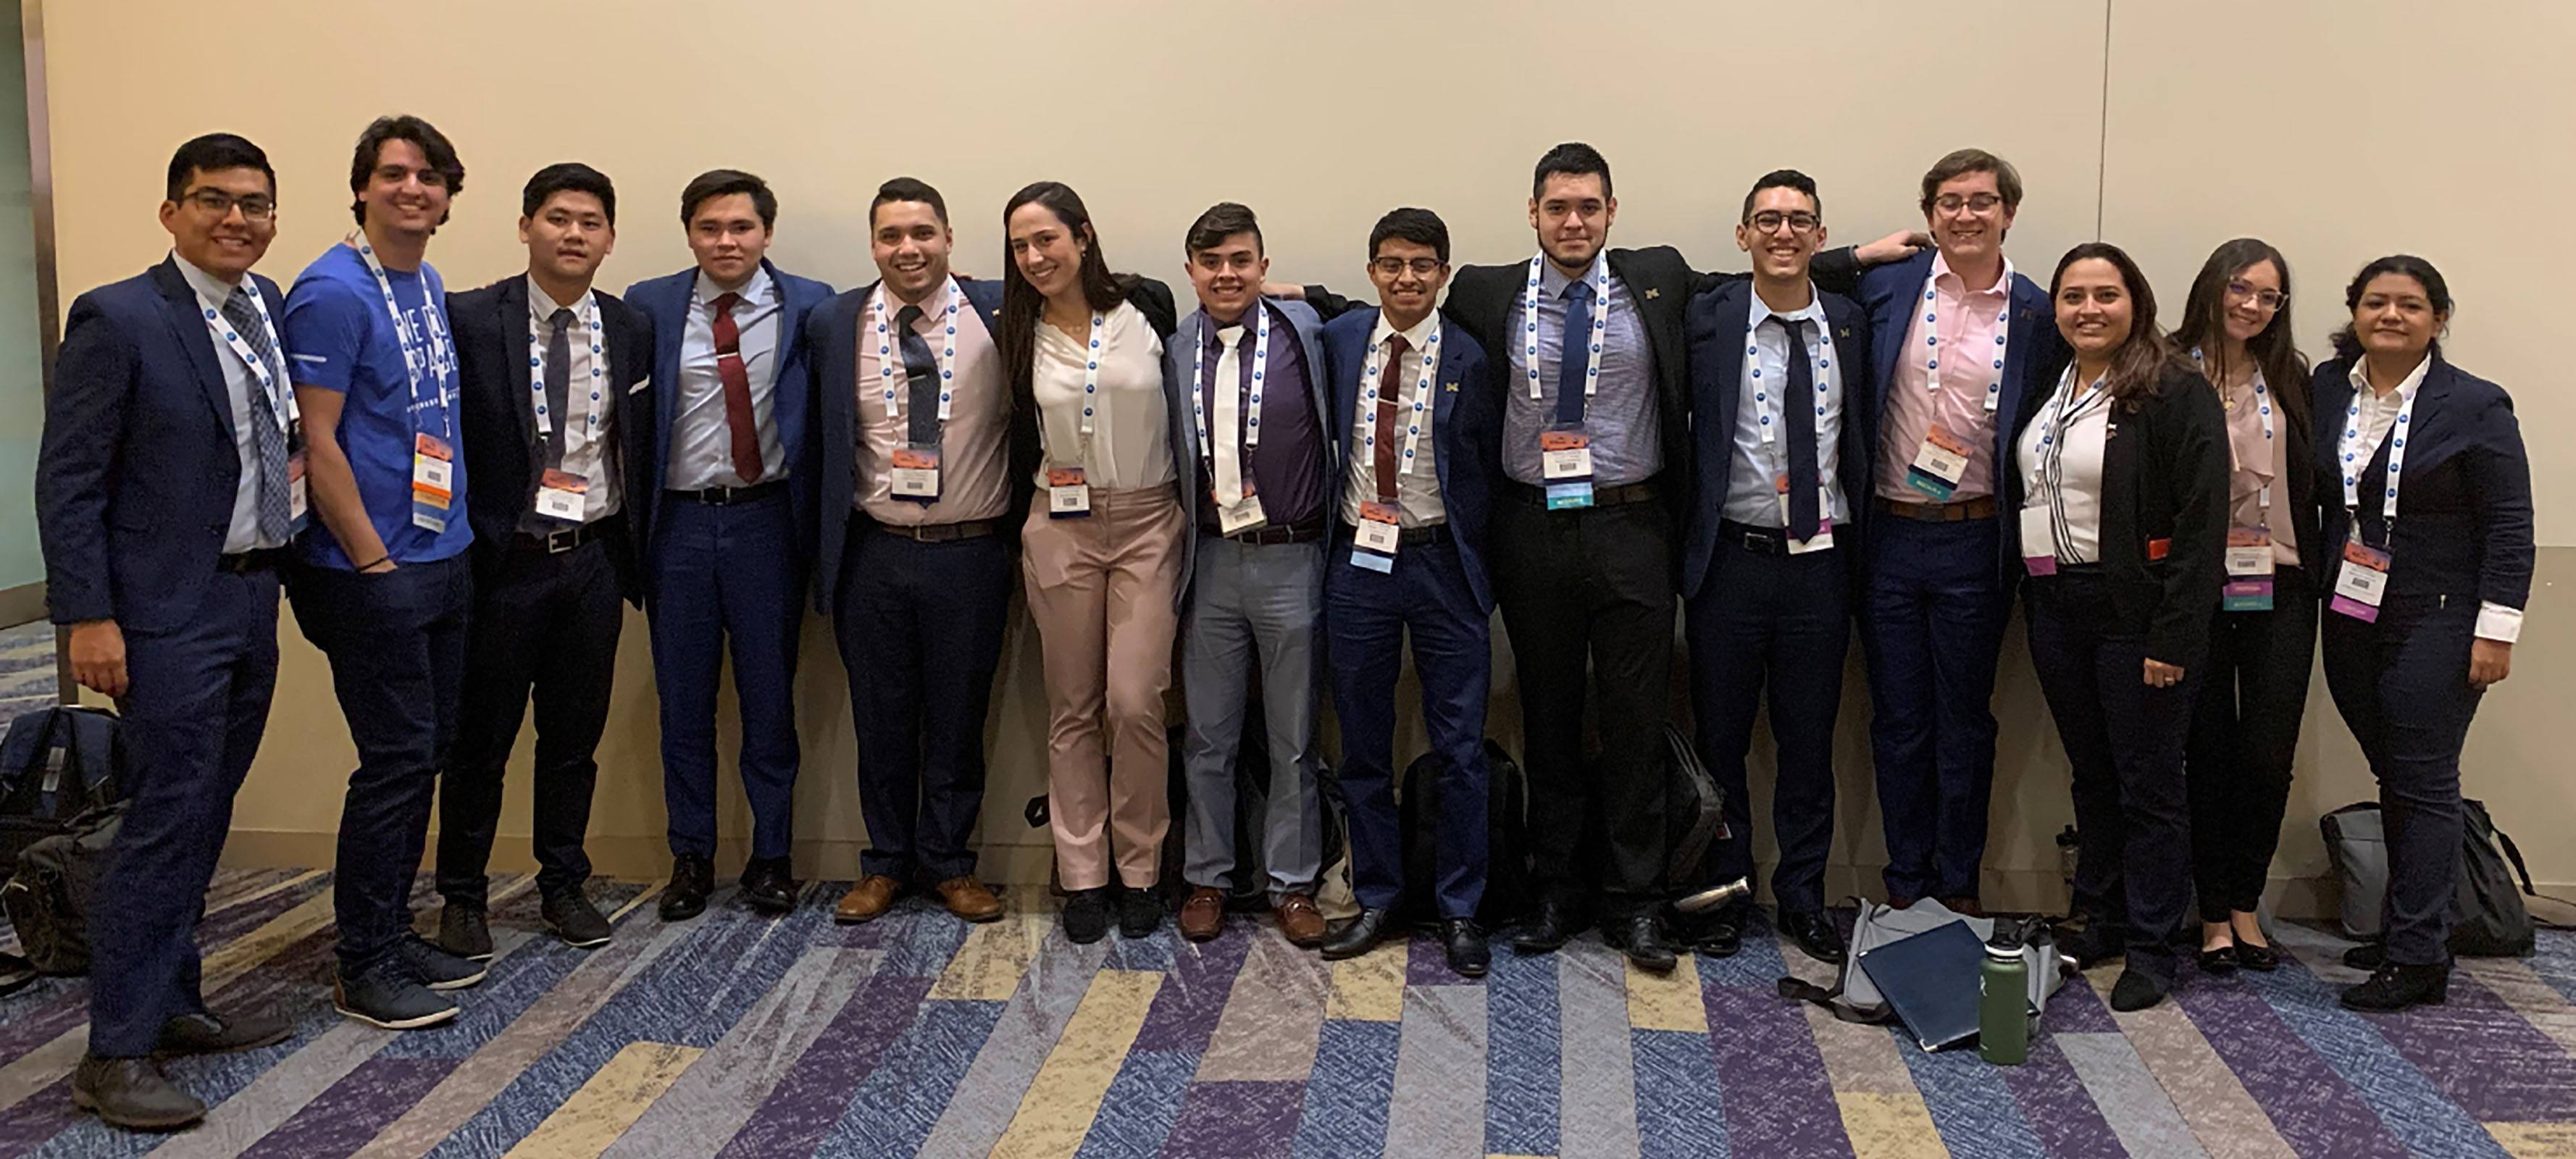 Society of Hispanic Professional Engineers makes connections, builds